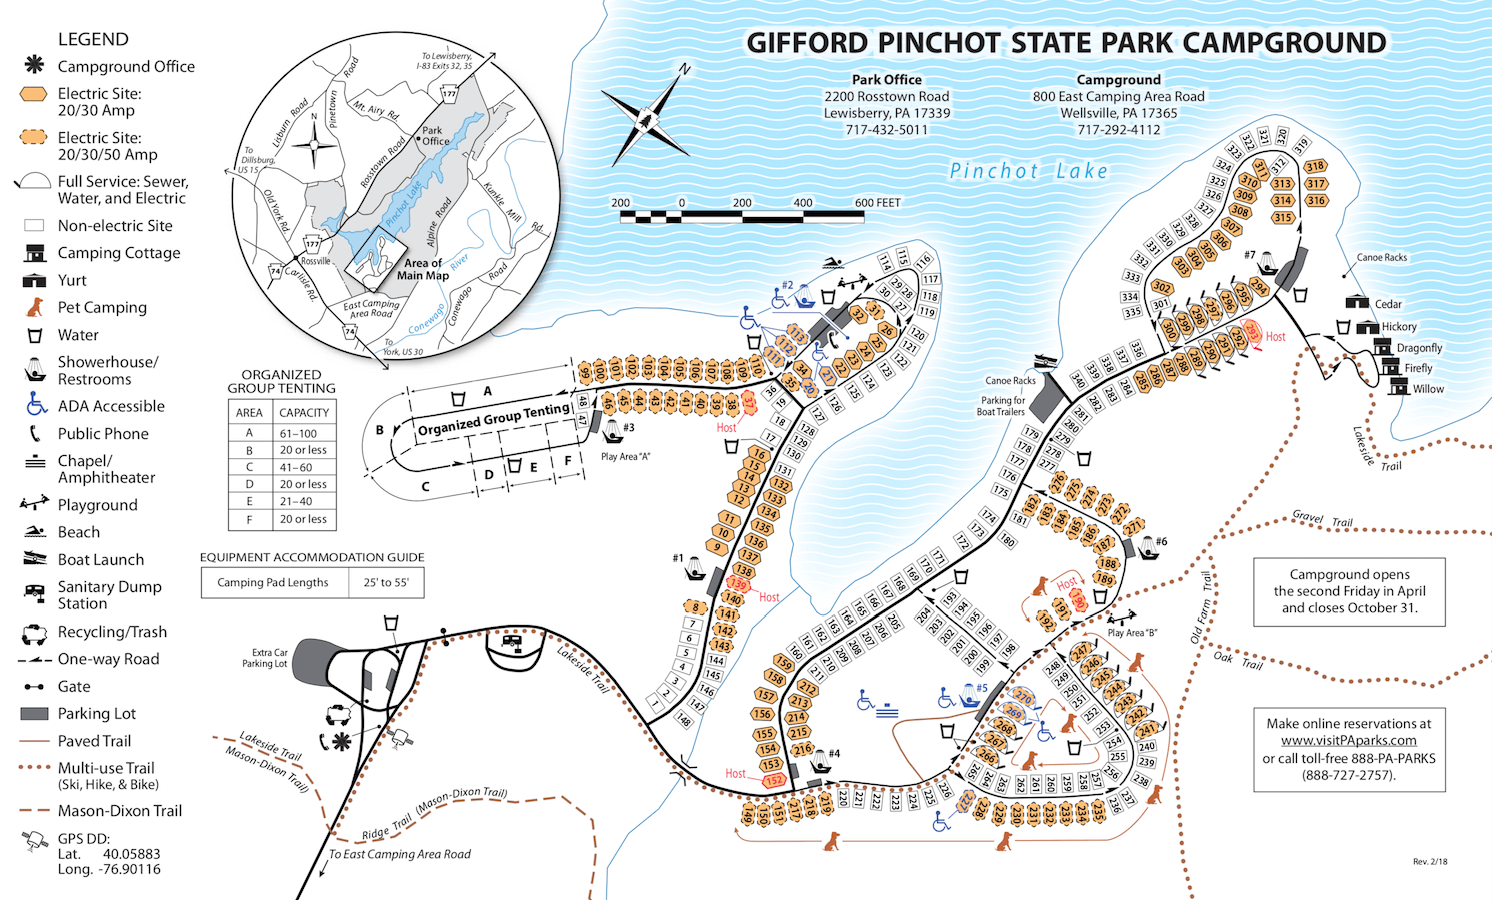 Gifford Pinchot State Park Campsite Photos And Camping Information